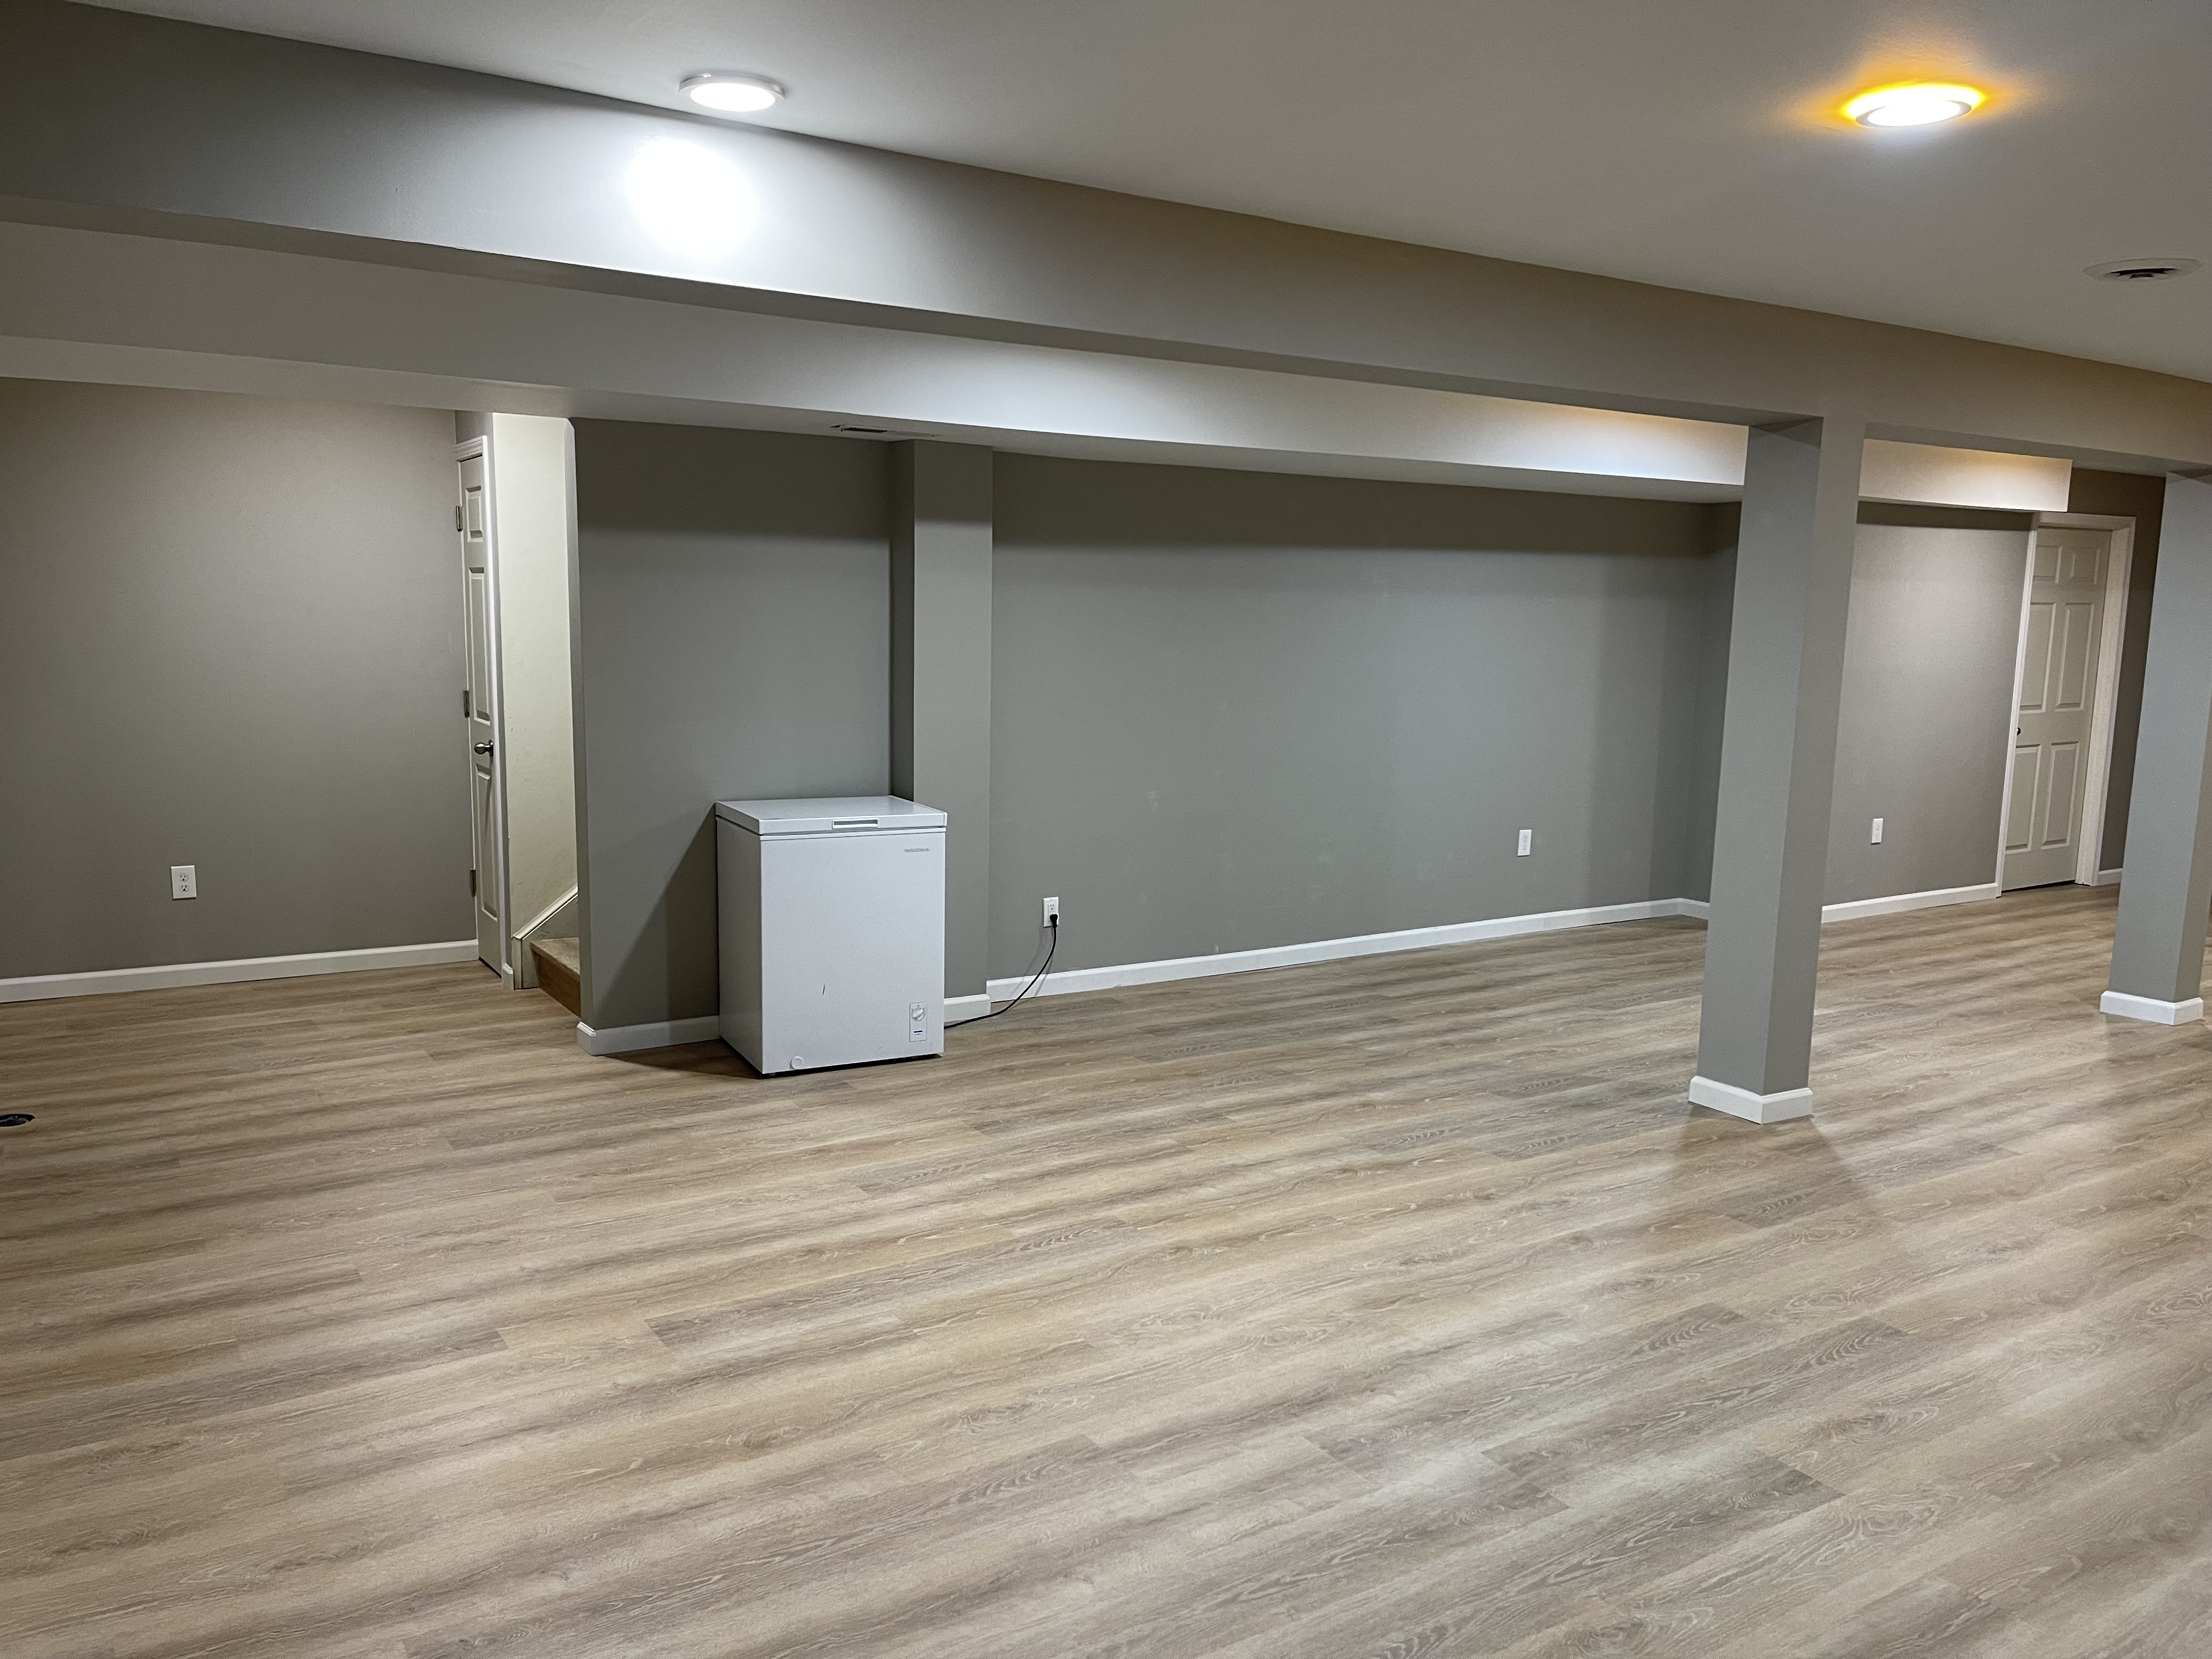 When it comes to basement remodeling, there are various factors to consider in order to transform the space into a functional and aesthetically pleasing area.